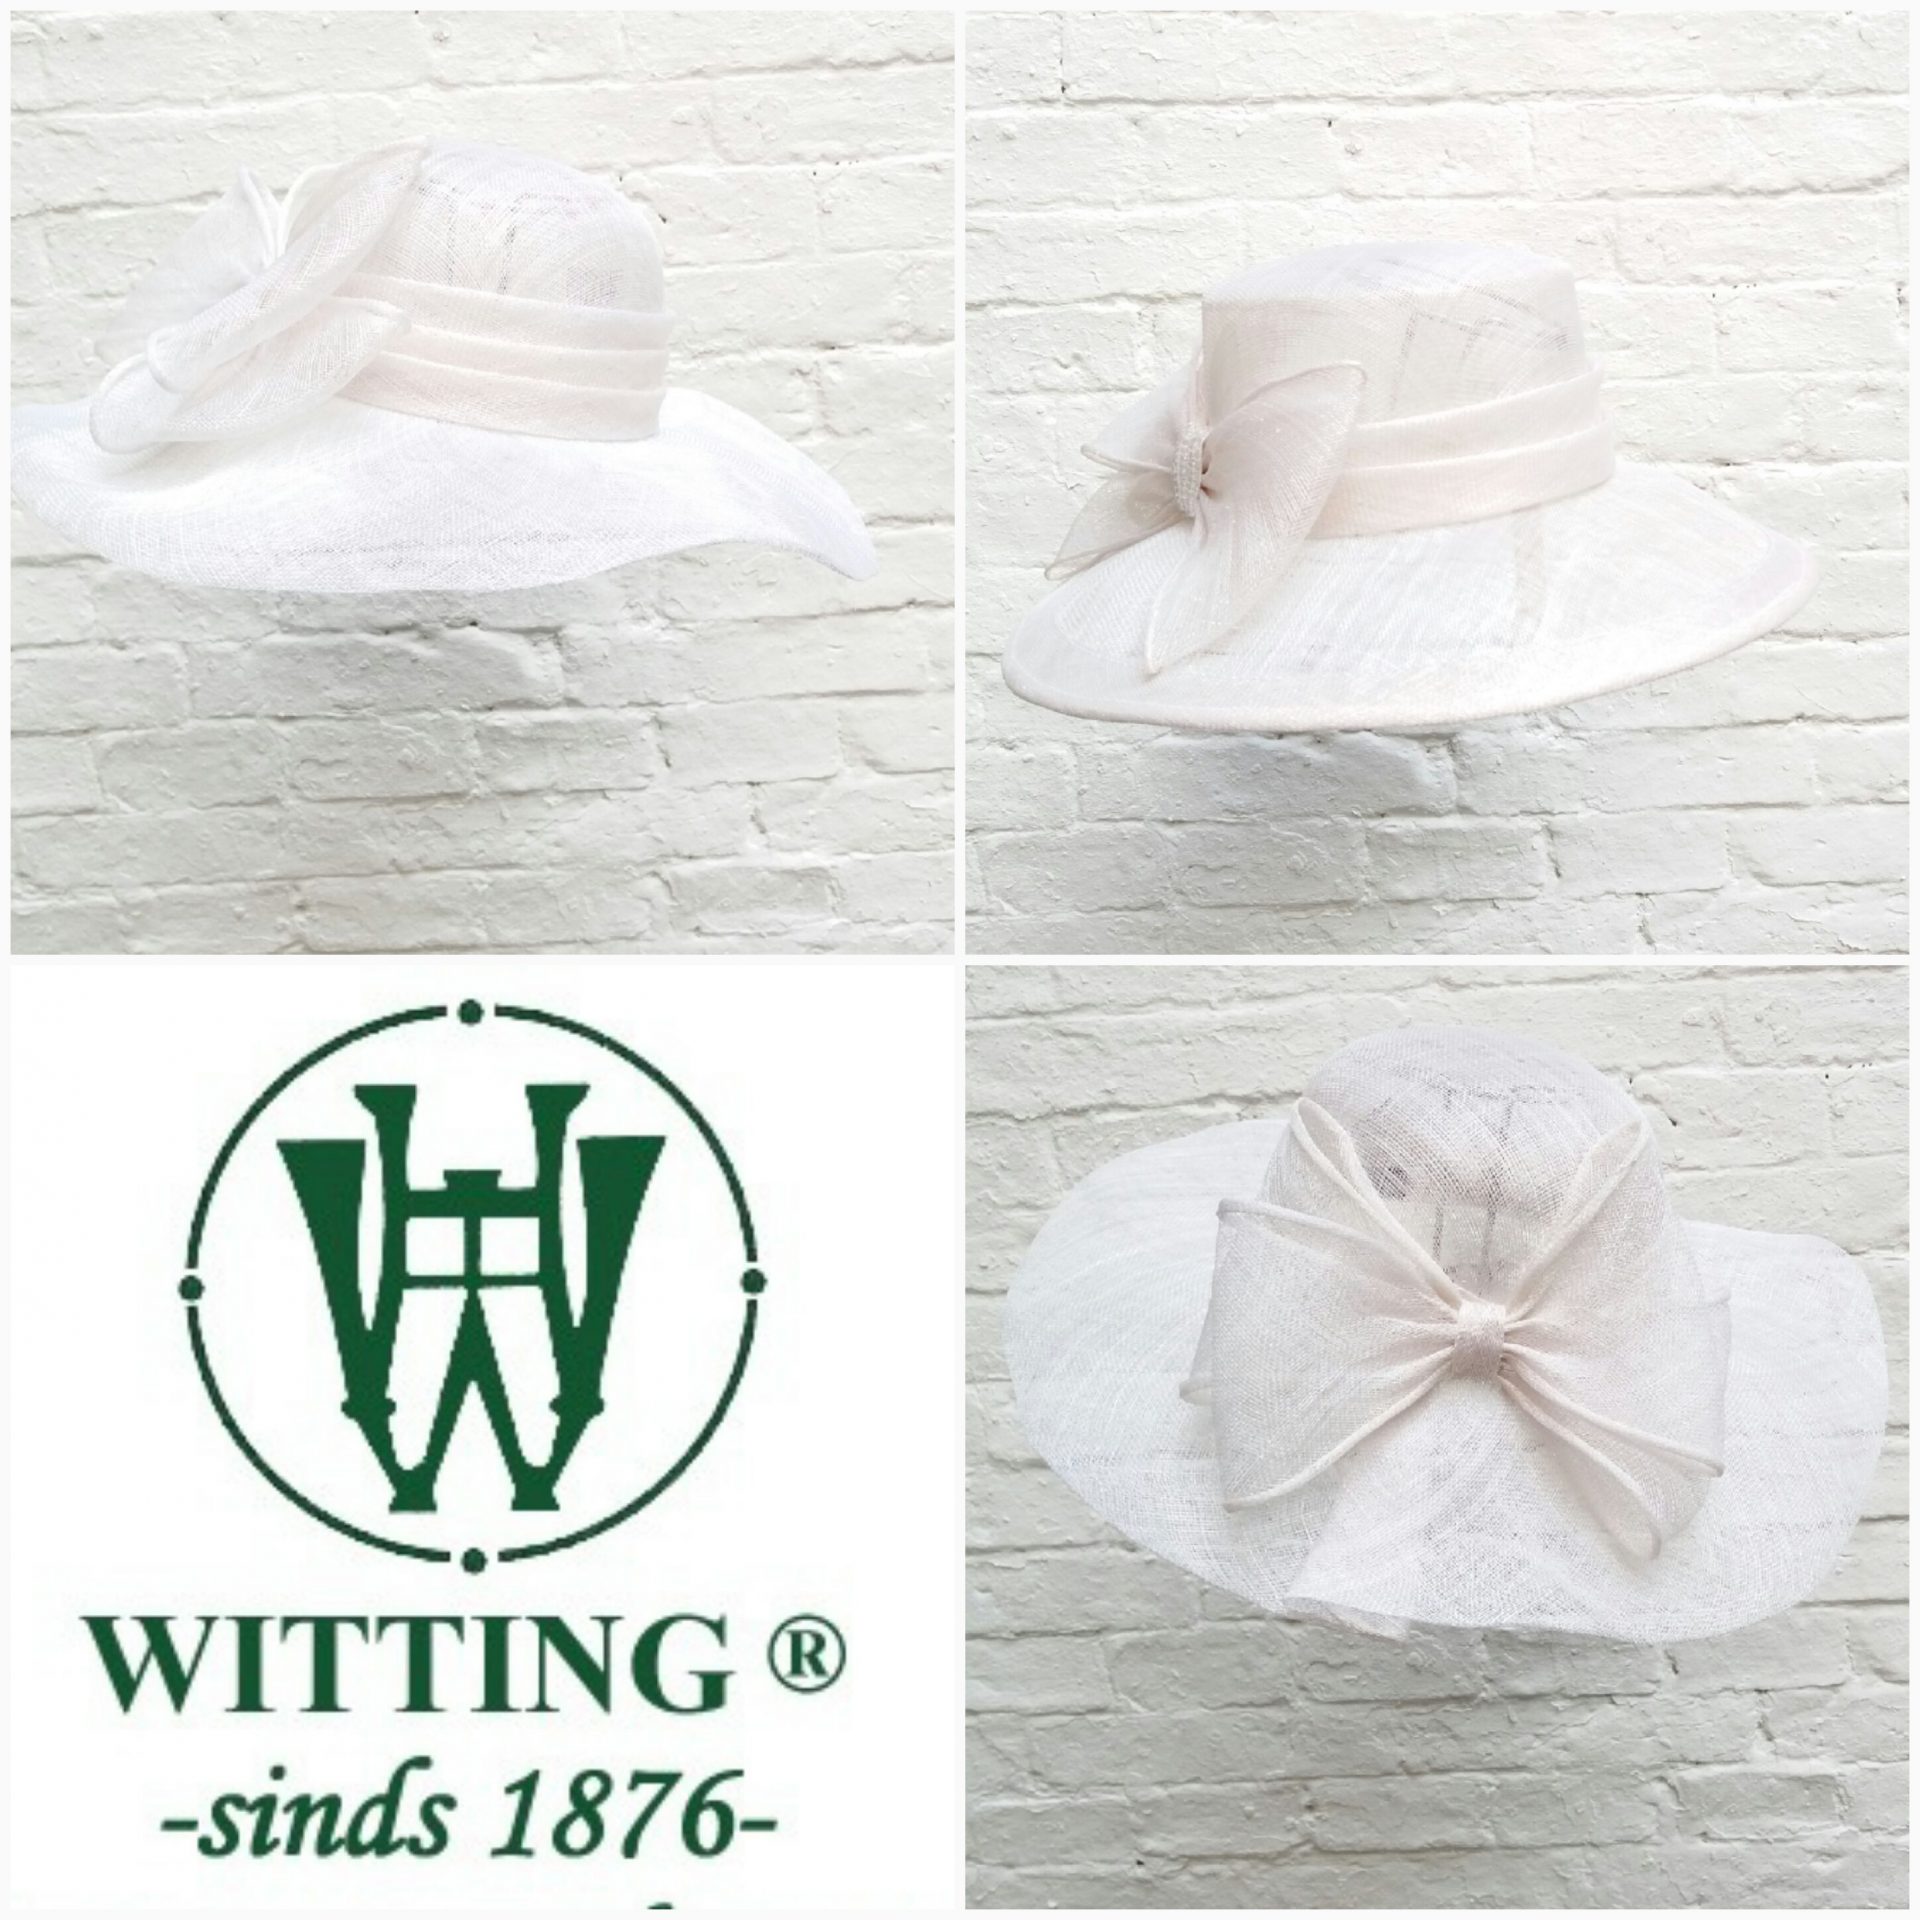 White hats for church derby and events H. Witting and Son